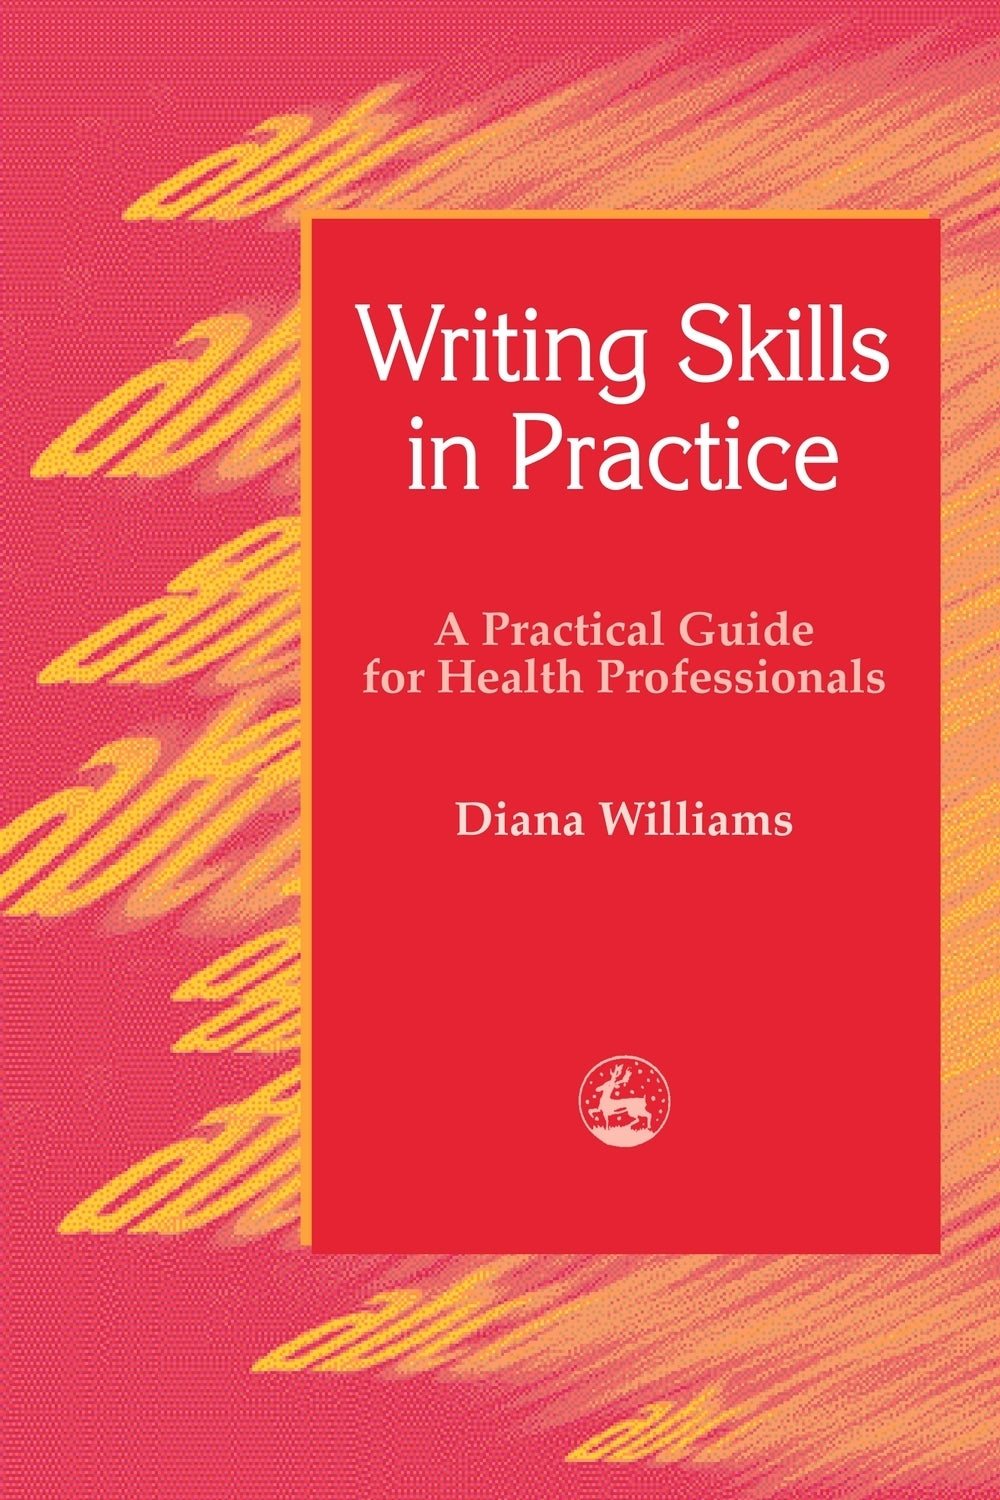 Writing Skills in Practice by Diana Williams